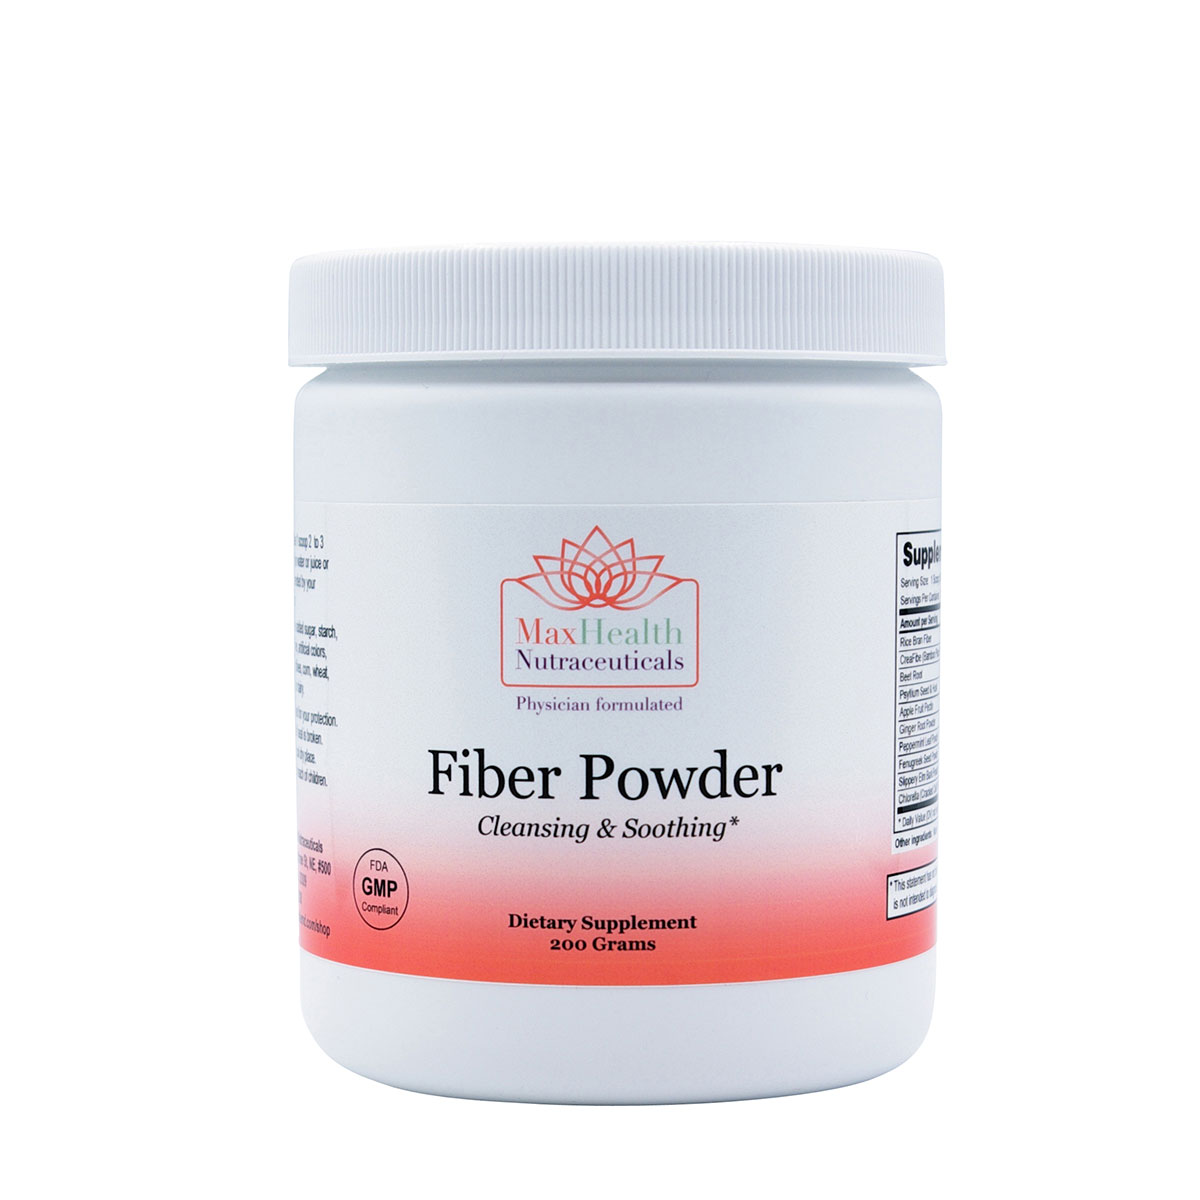 11Cleansing and Soothing Fiber Powder